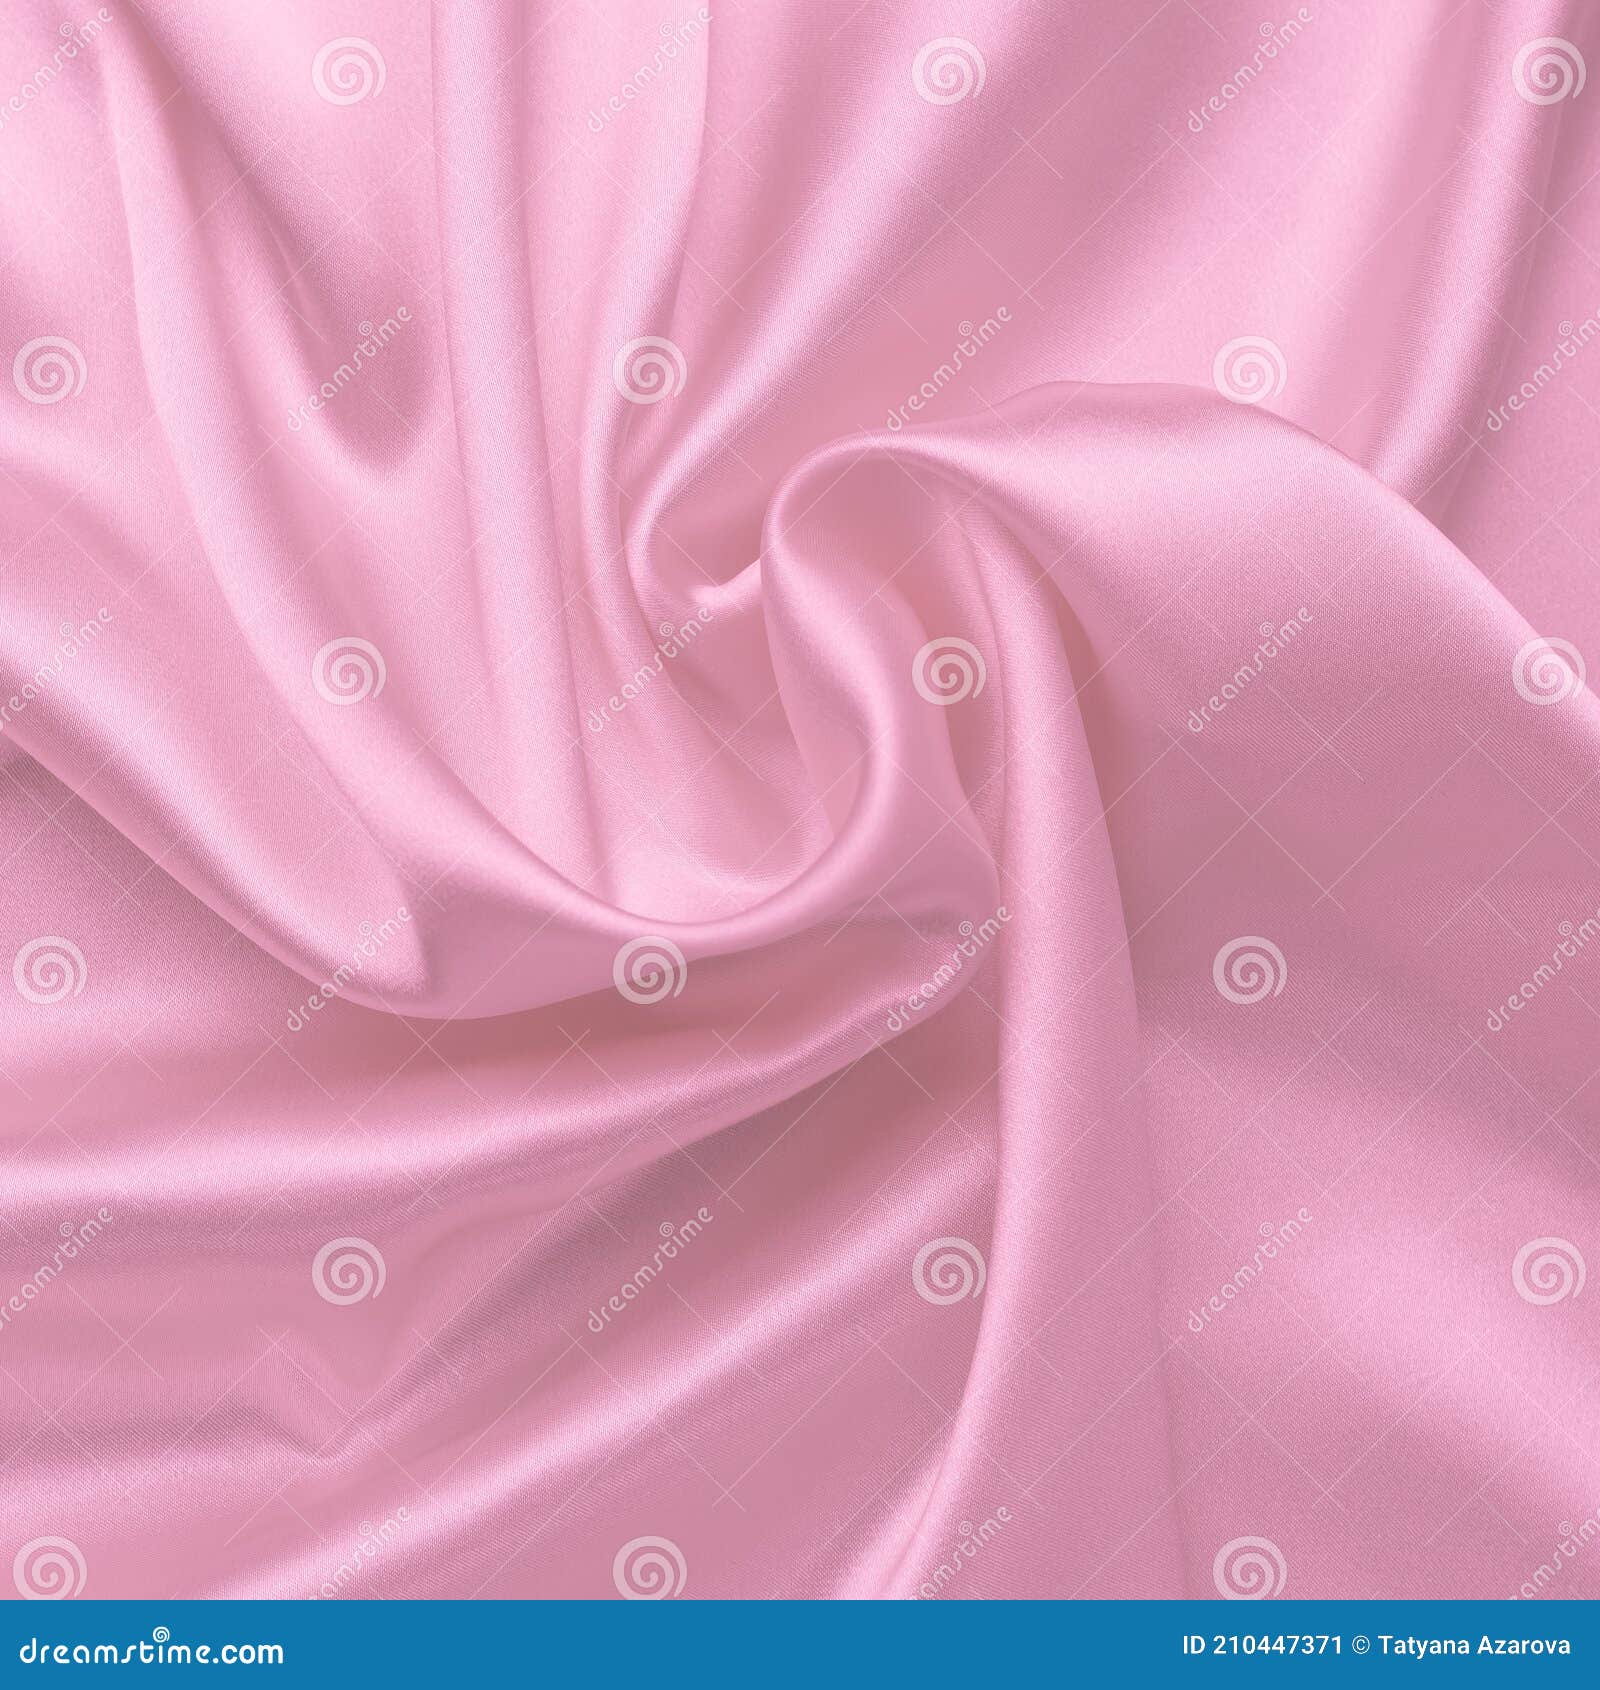 Pink Satin Fabric Texture, Silk Background with Folds. Wavy Abstract  Pattern, Luxury Shiny Bed Sheet, Soft Textile. Flow Effect Stock Image -  Image of cloth, effect: 210447371